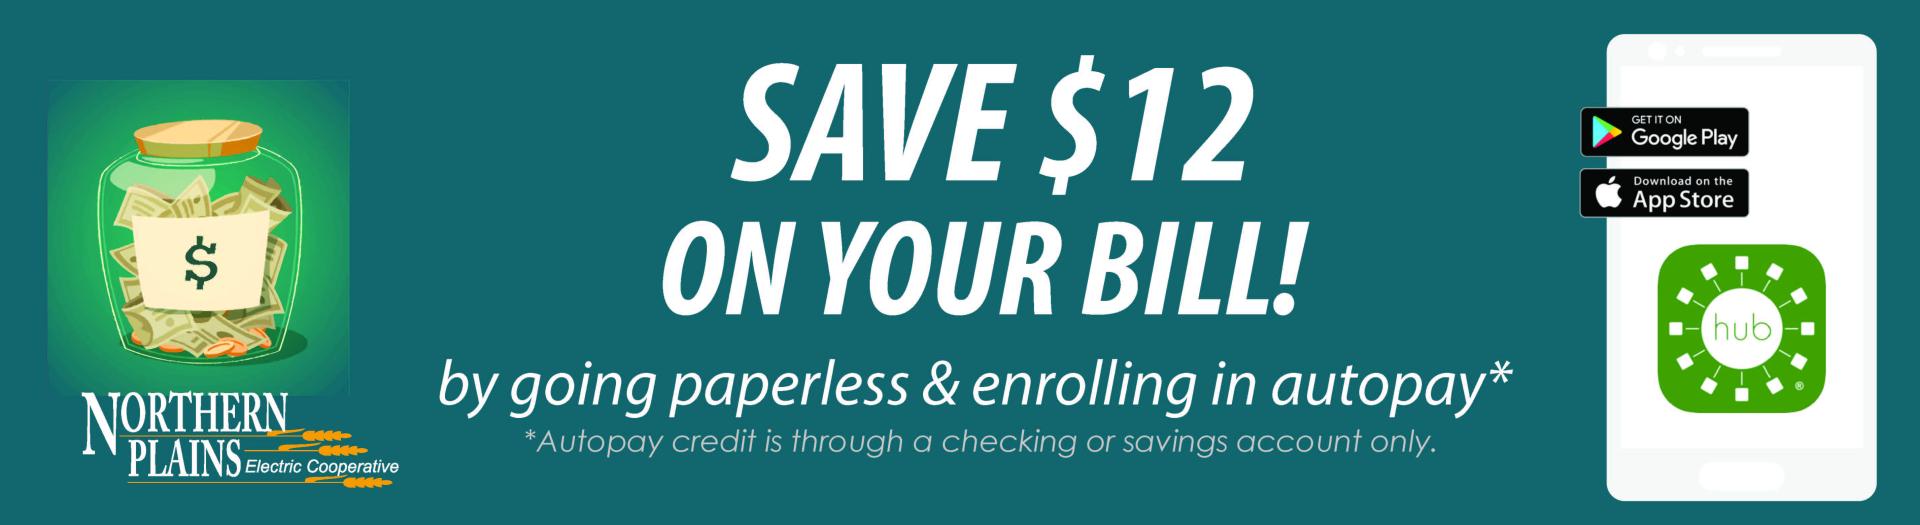 Save $12 on your bill!